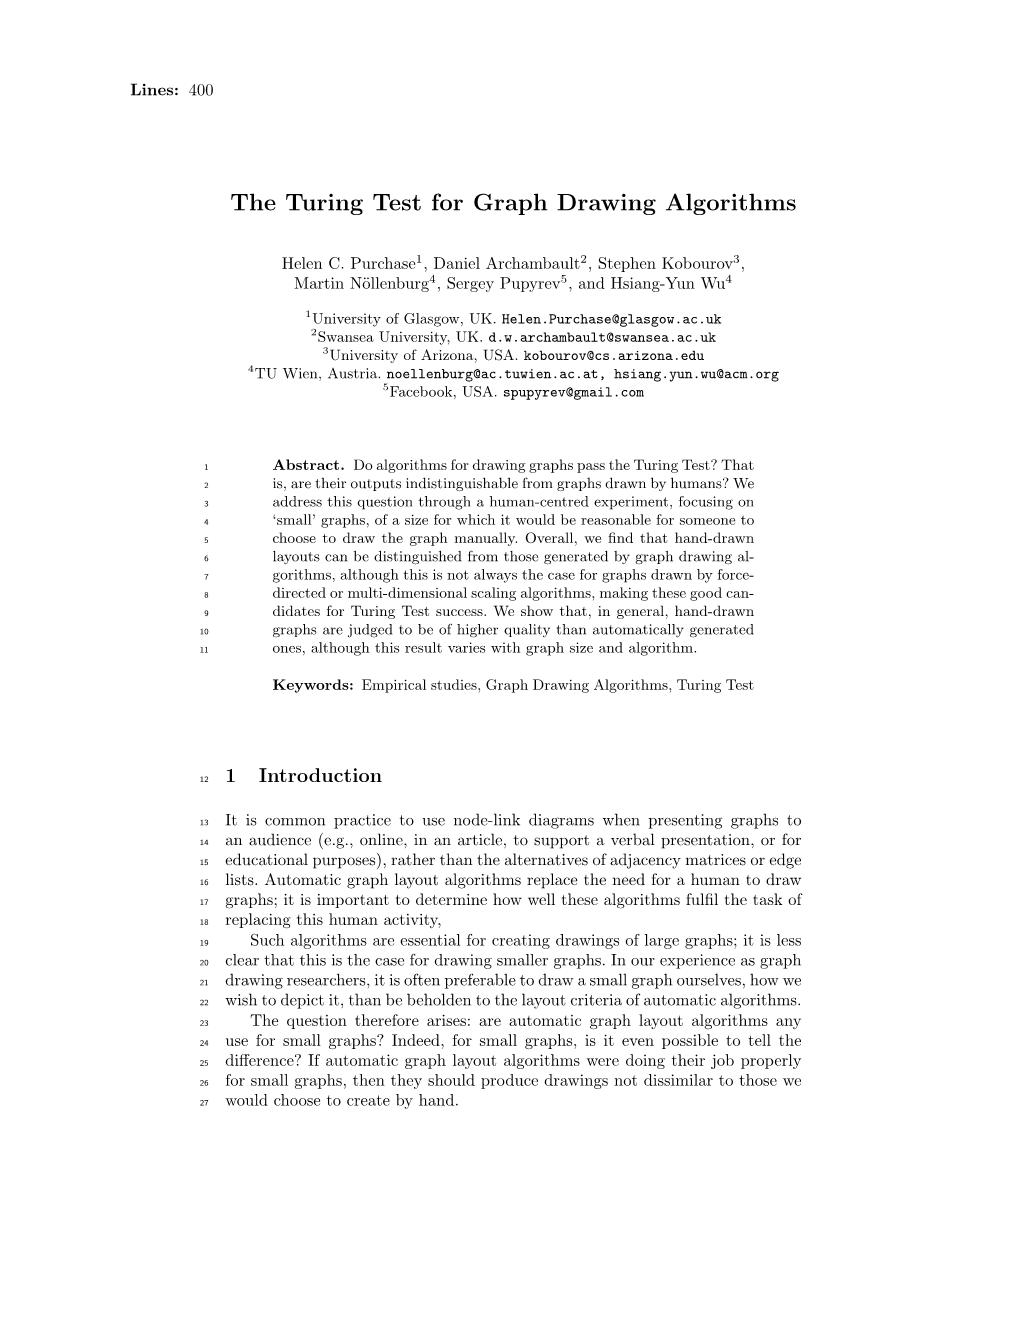 The Turing Test for Graph Drawing Algorithms